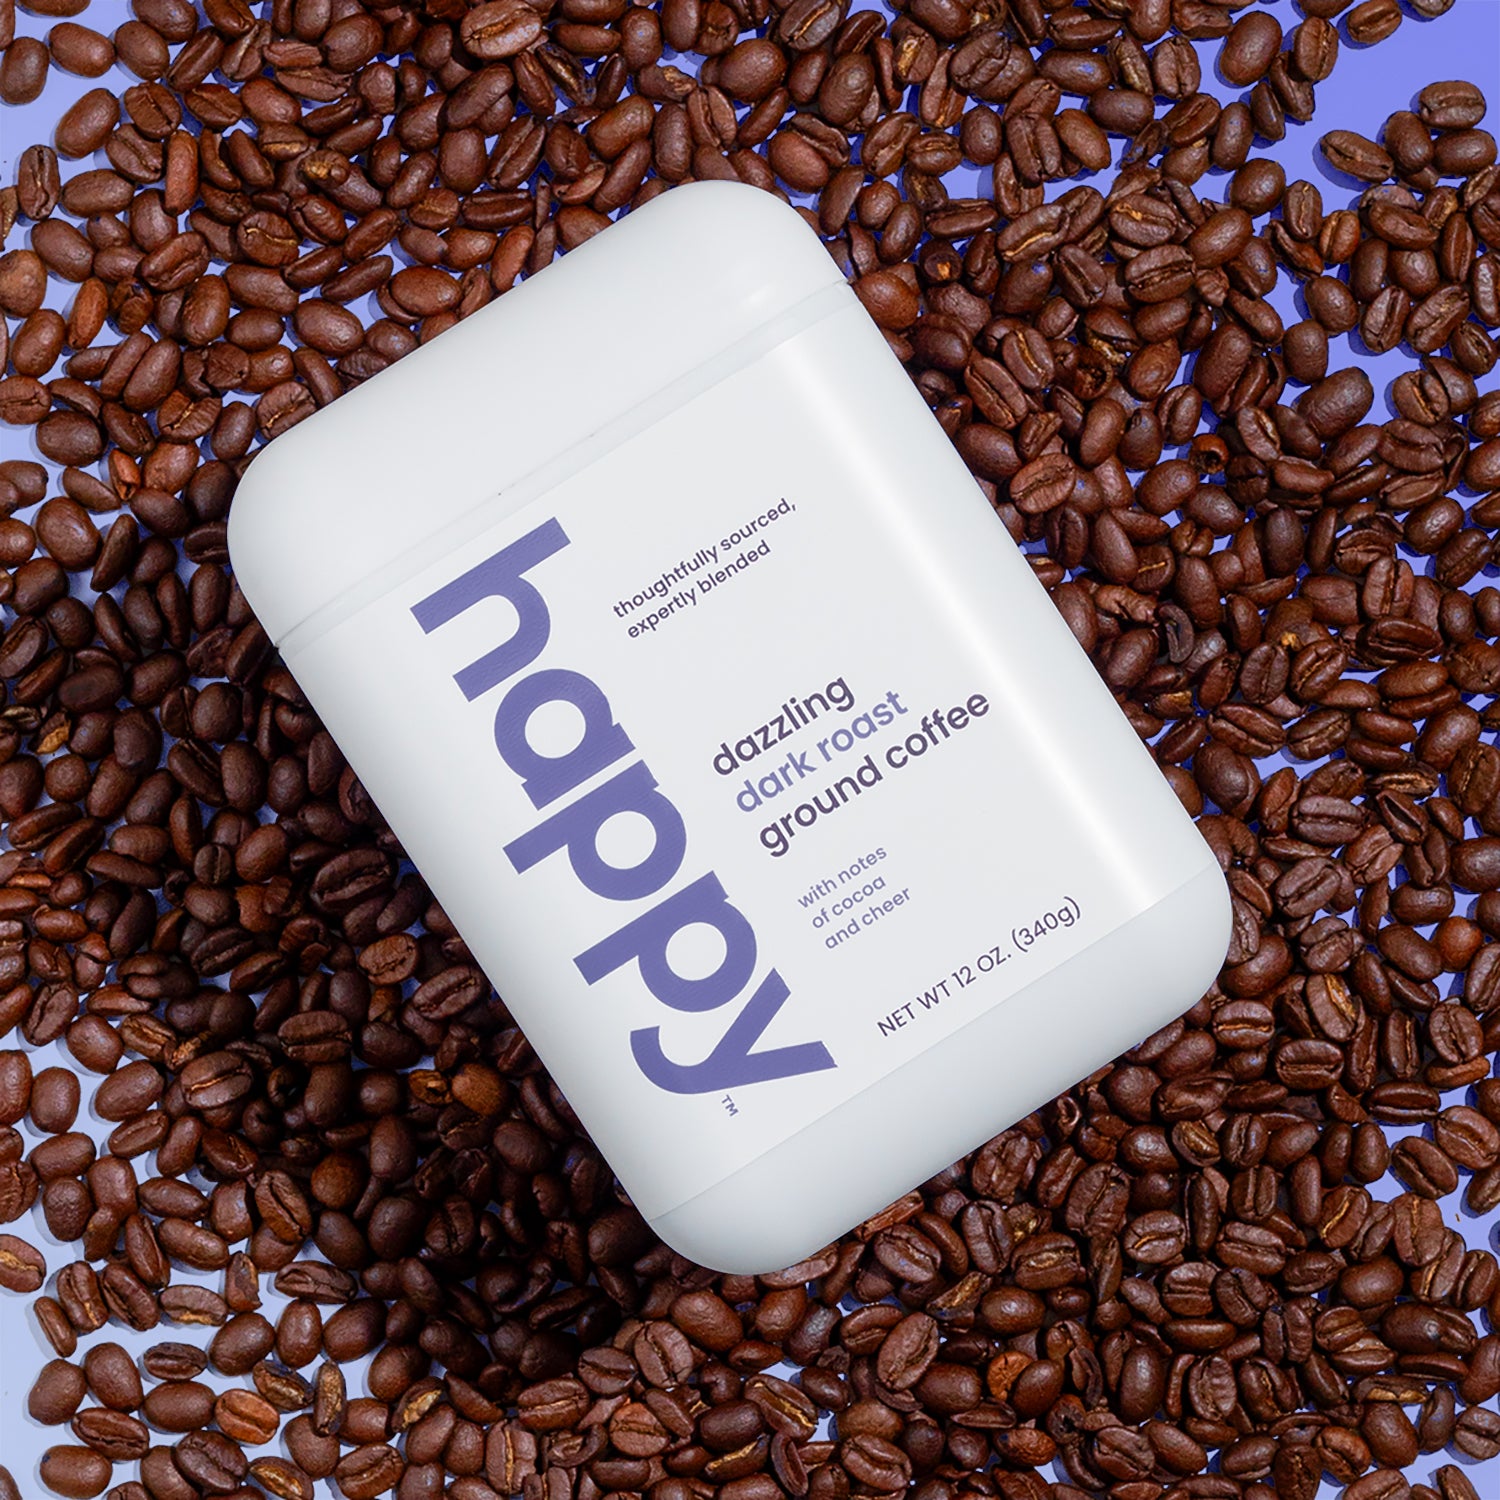 A container of dazzling dark roast ground coffee resting on a bed of coffee beans